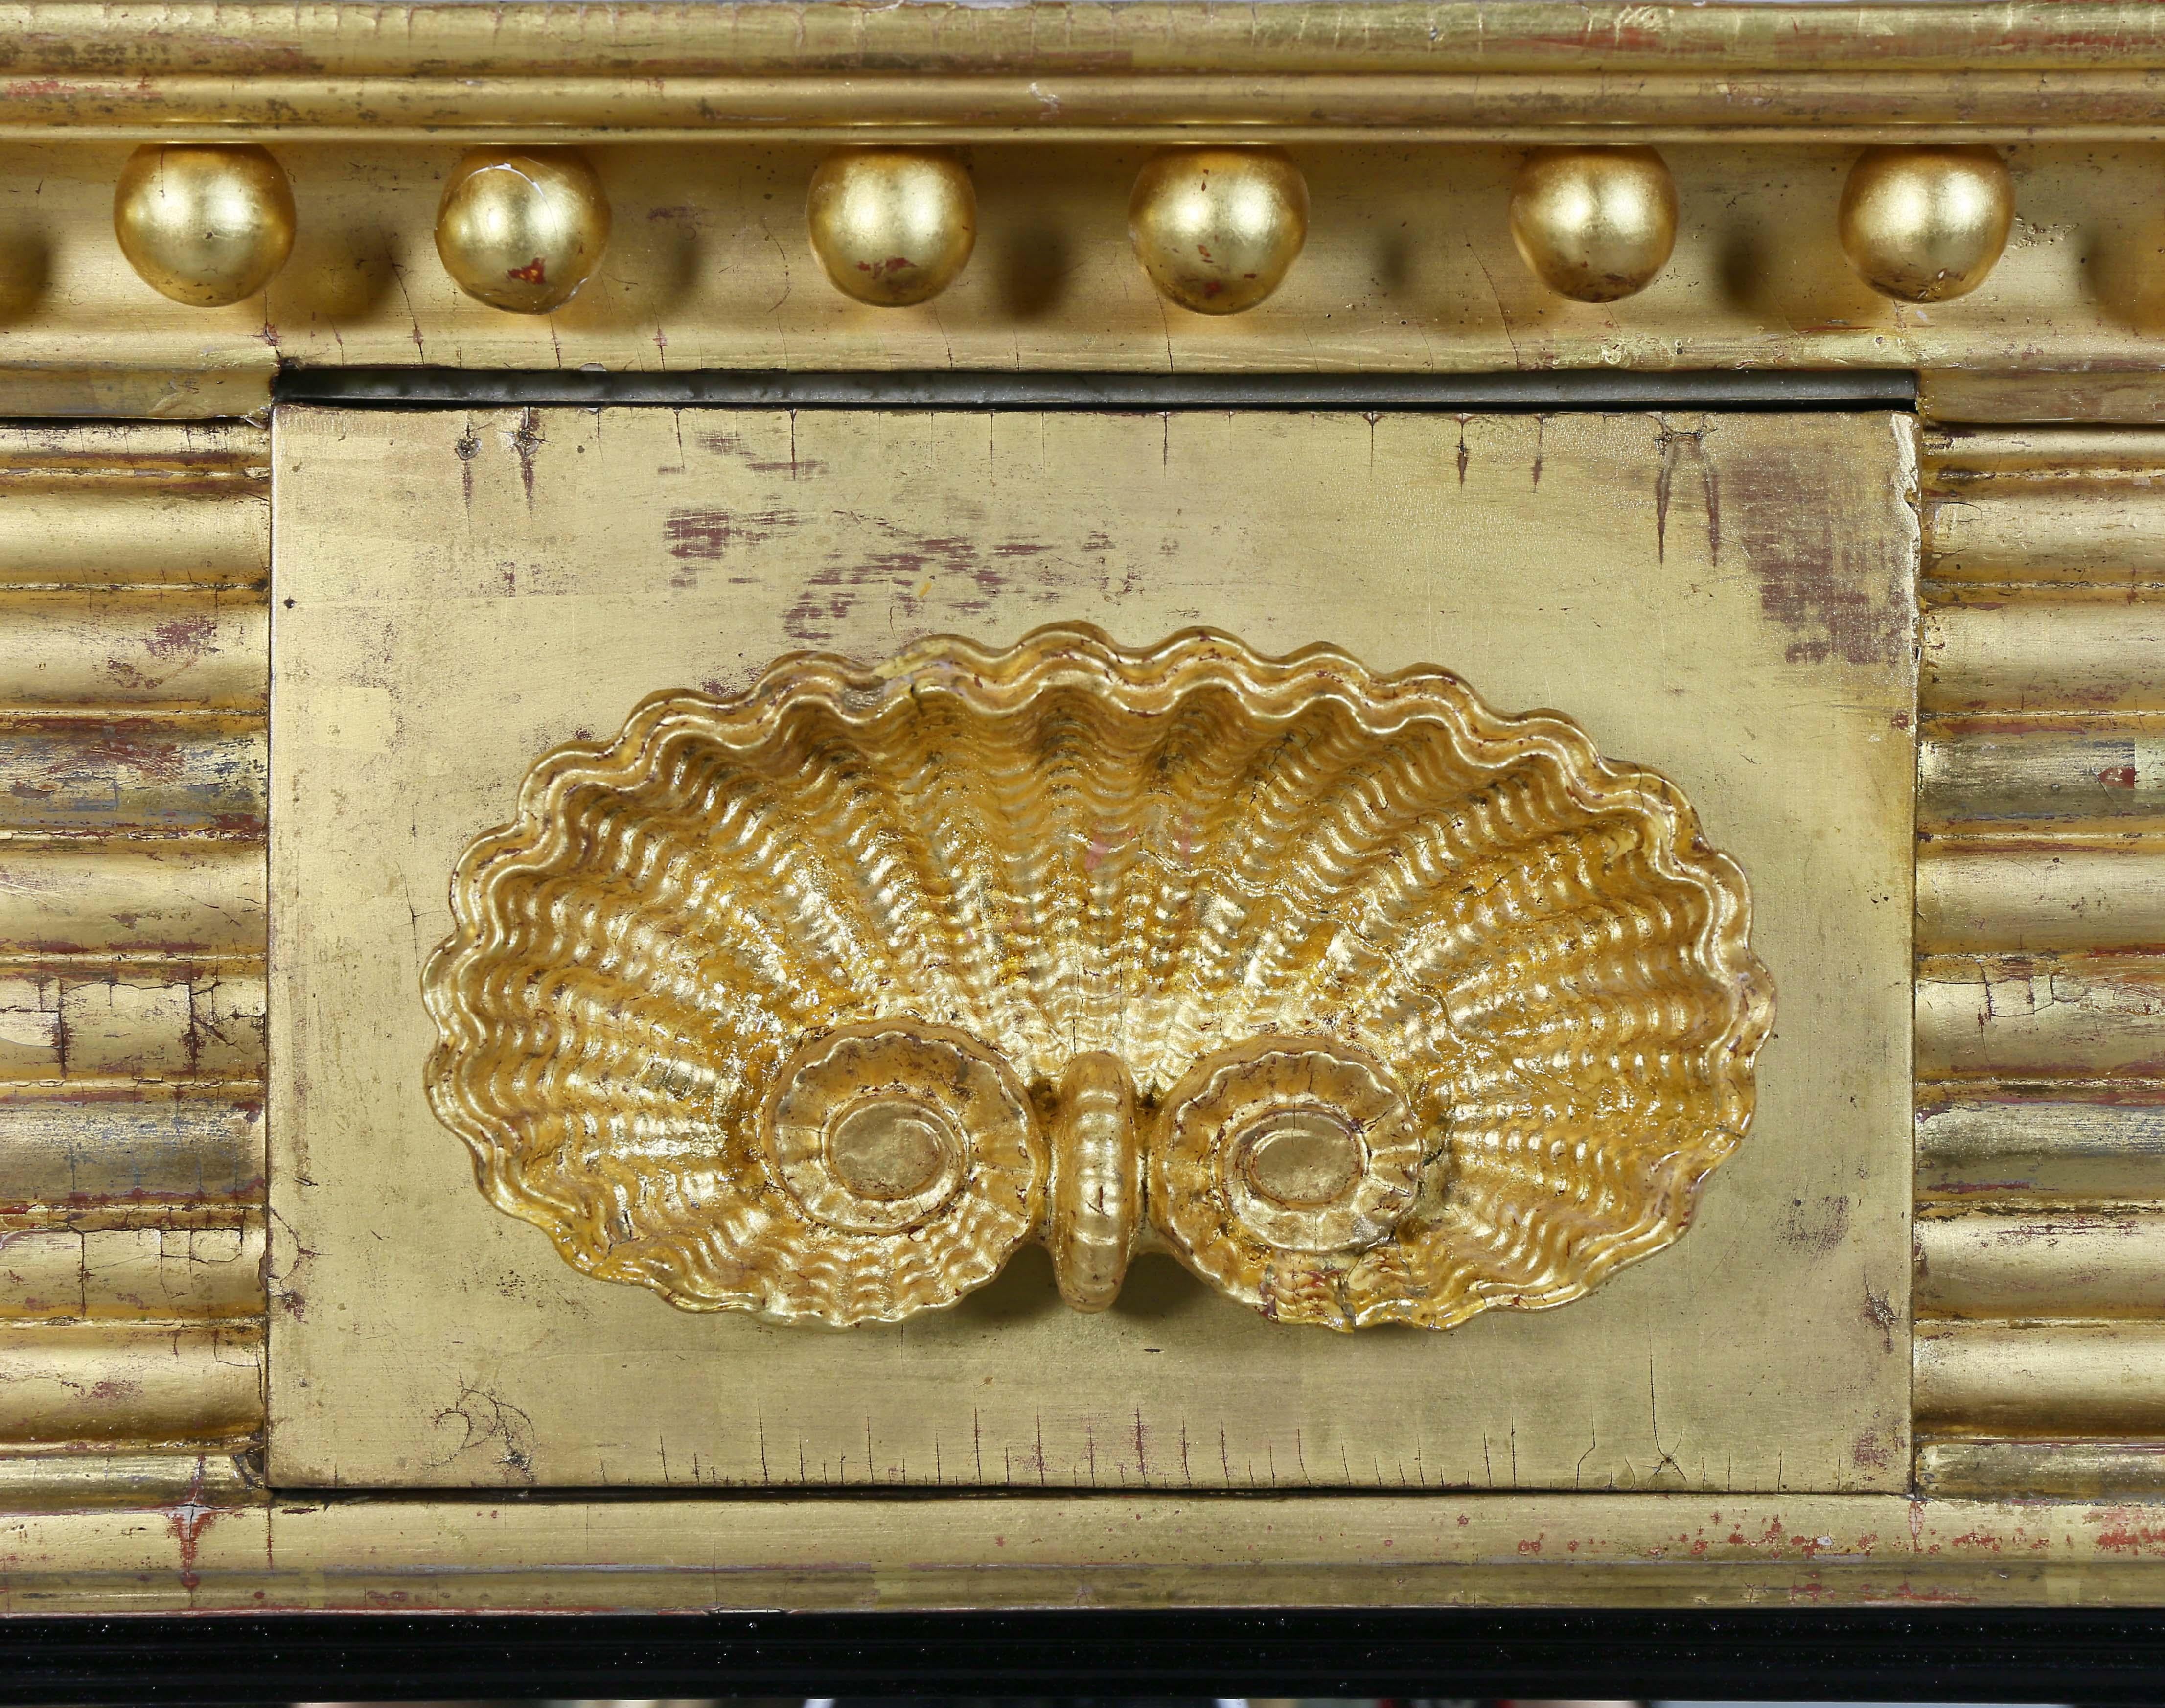 Cornice with sperules over a central shell and flanked by horizontal reeded decoration, the mirror with ebonized wood outer band flanked by rope twist columns.